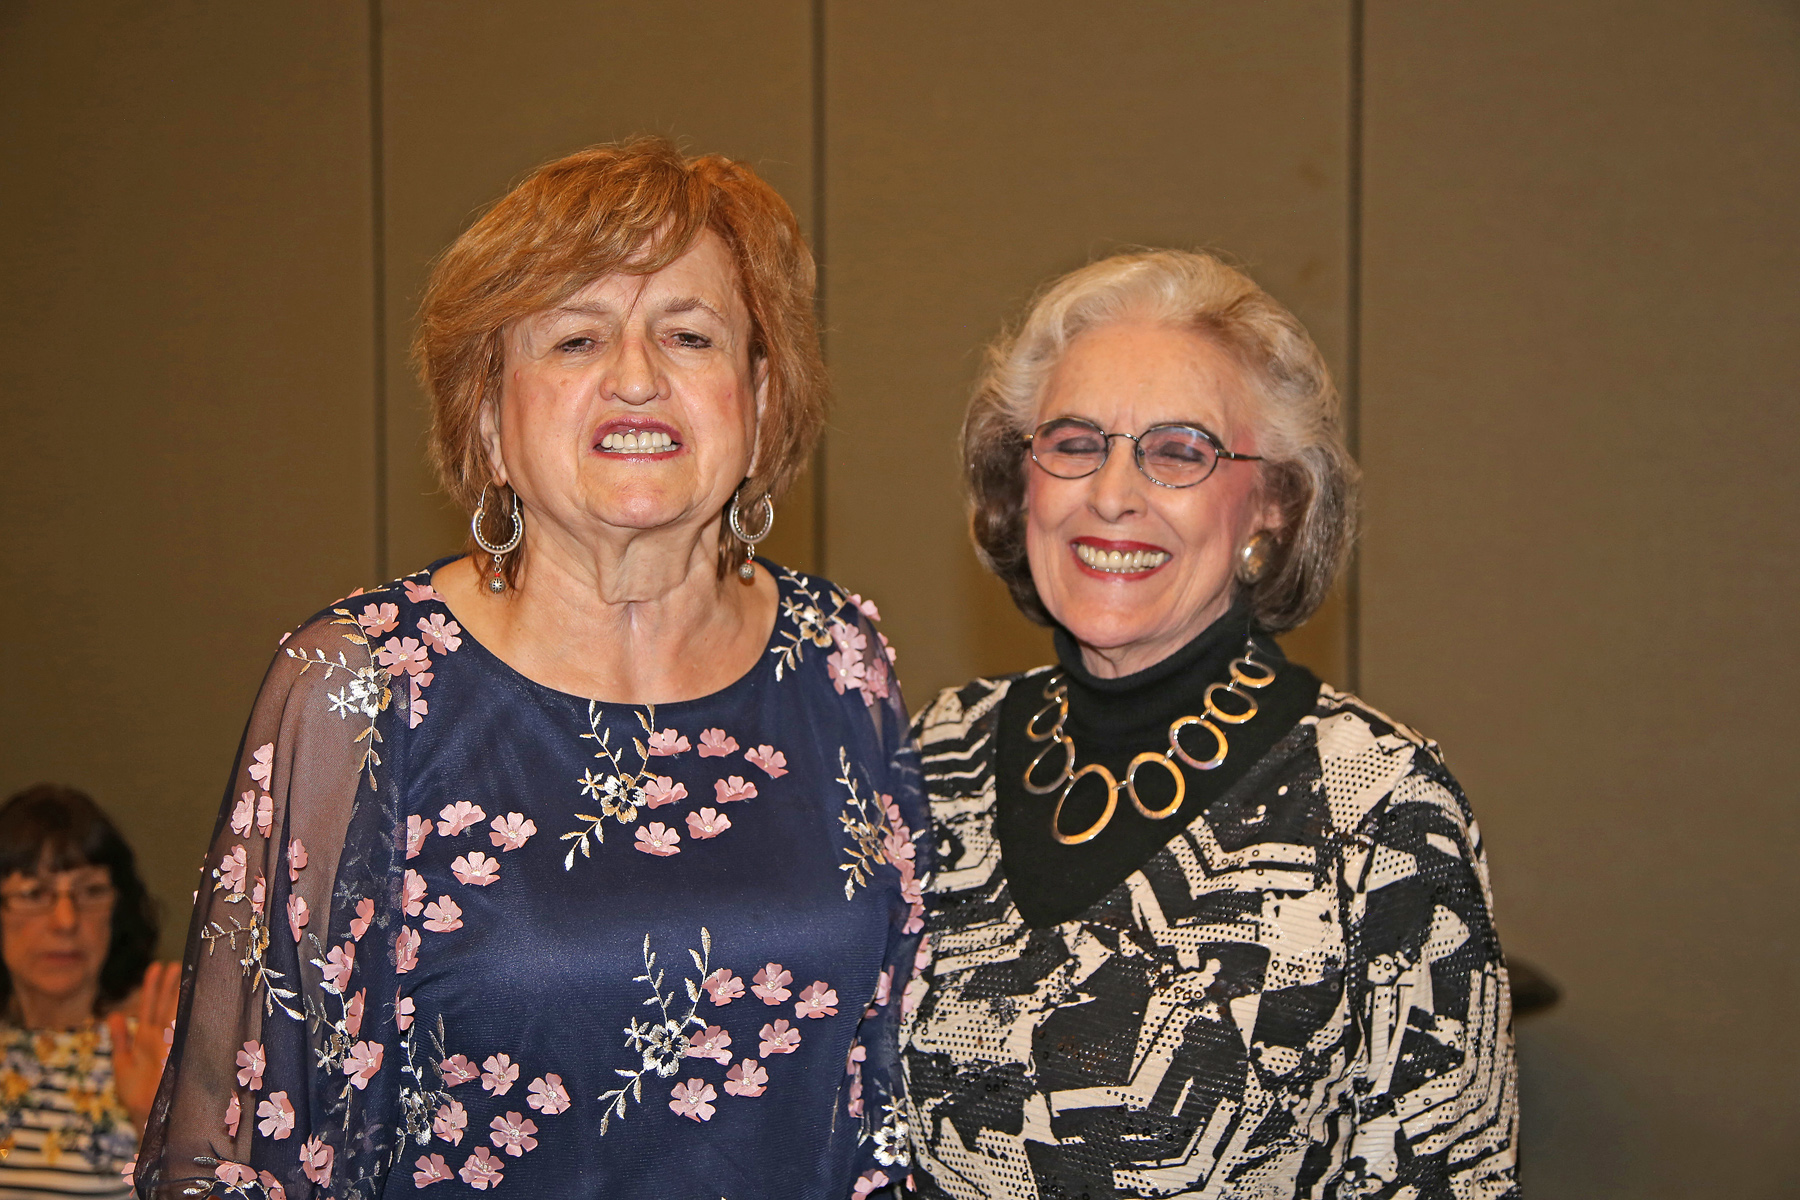 Guests at Spring 2019 Luncheon and Annual Meeting - Emeriti Assoc.